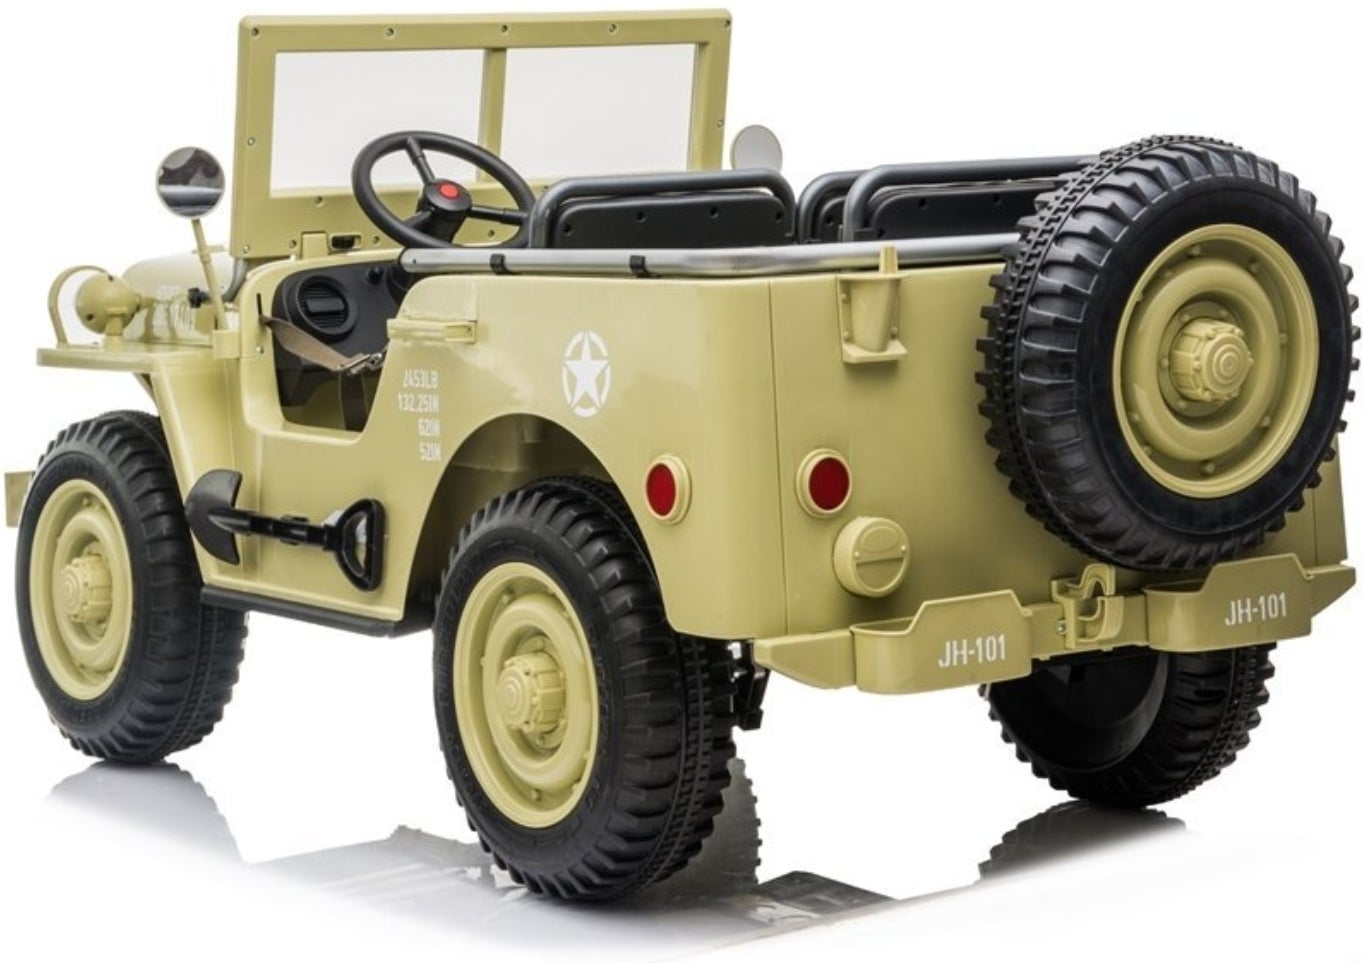 Khaki green vintage military Willys Jeep 4WD electric ride on car for kids with three seats, isolated on white background.